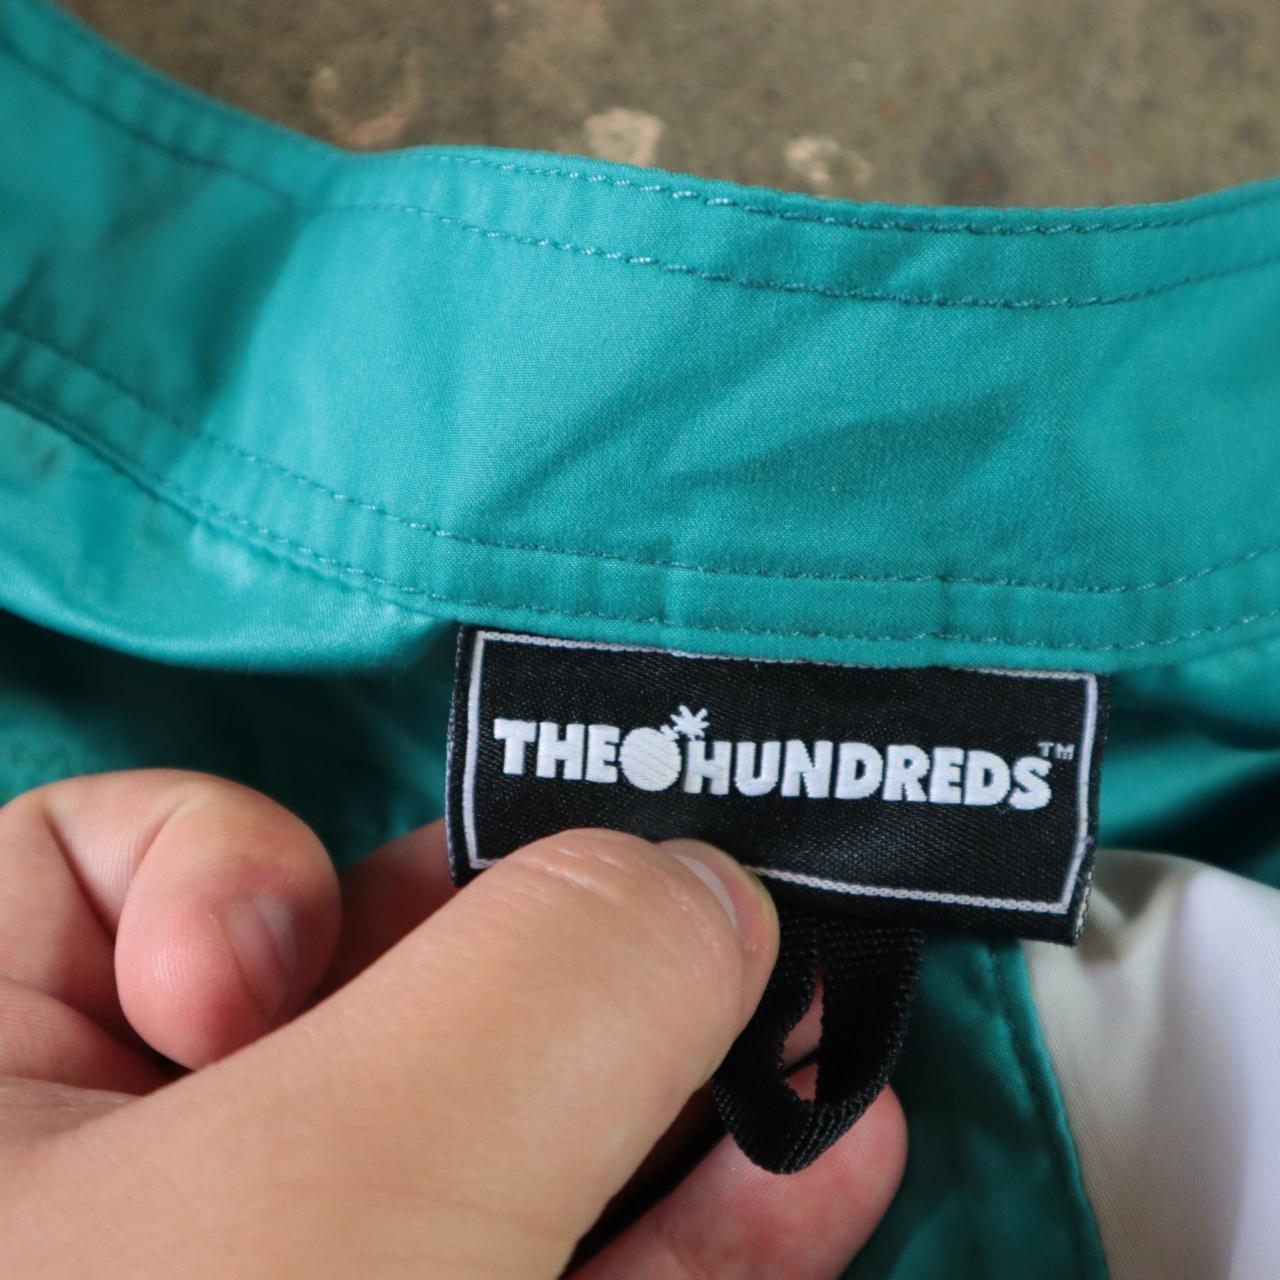 Product Image 4 - The Hundreds Beach Shorts

Striped color